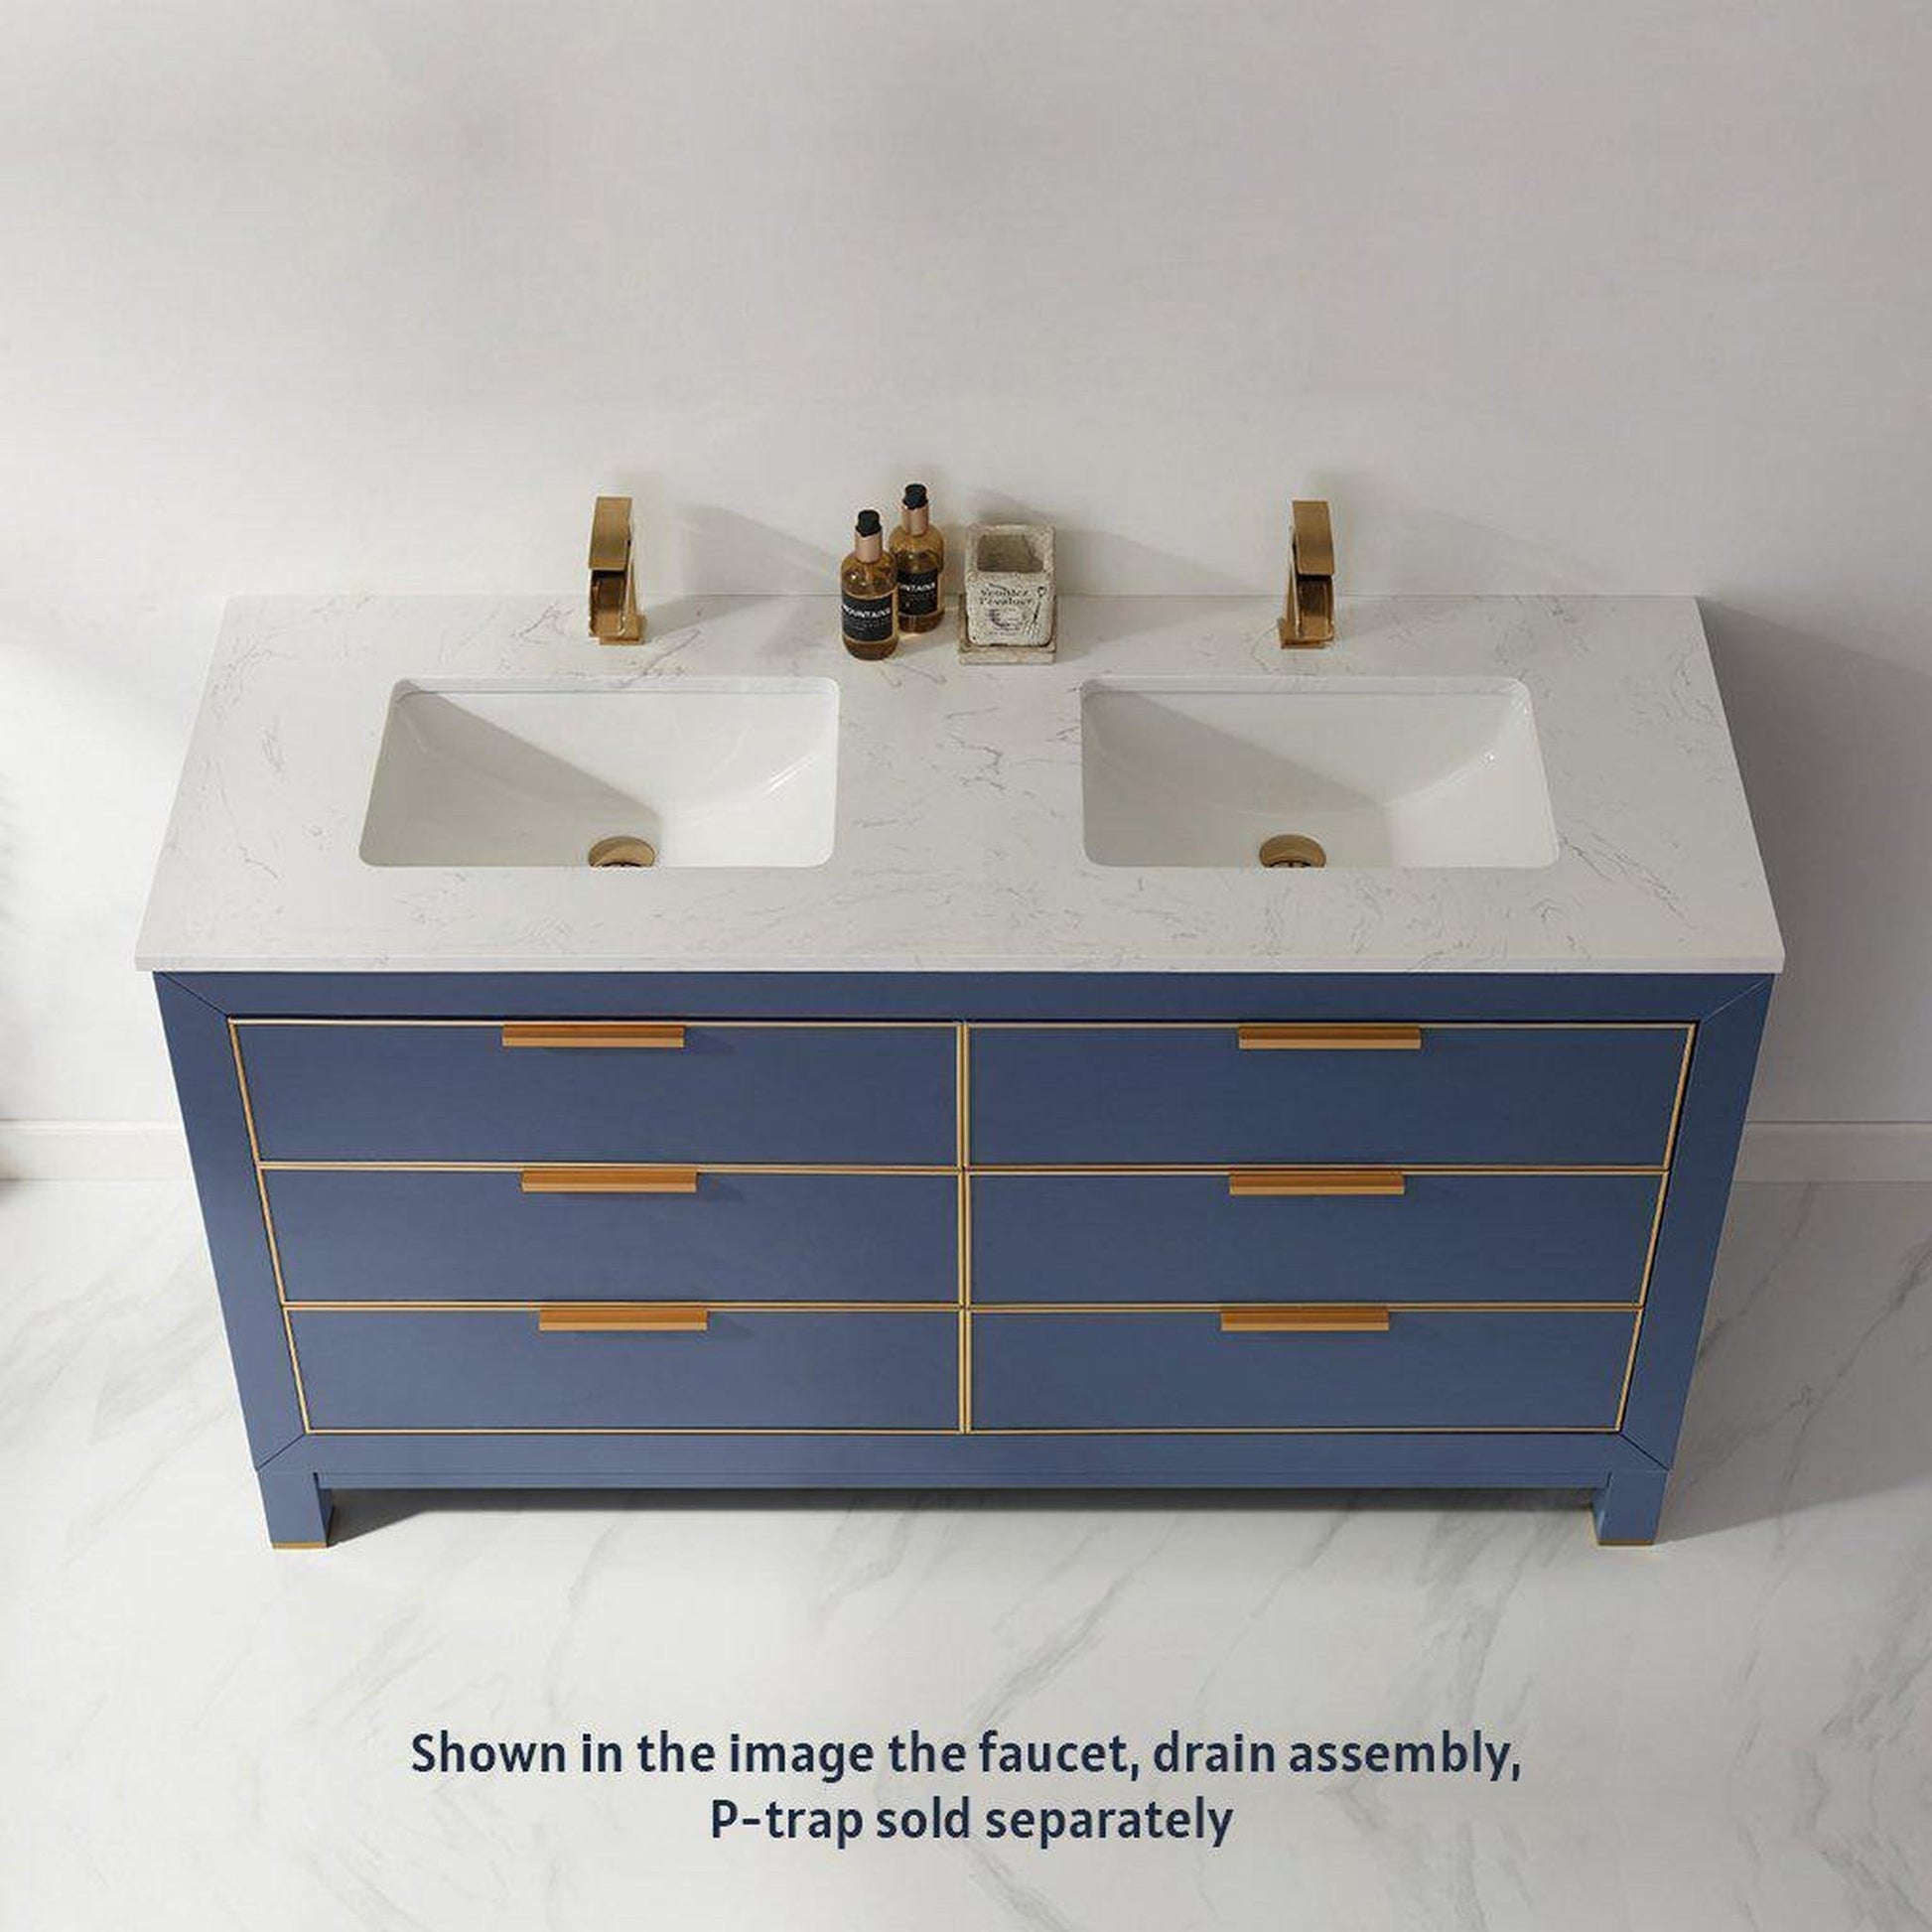 Altair Jackson 60" Double Royal Blue Freestanding Bathroom Vanity Set With Aosta White Composite Stone Top, Two Rectangular Undermount Ceramic Sinks, and Overflow